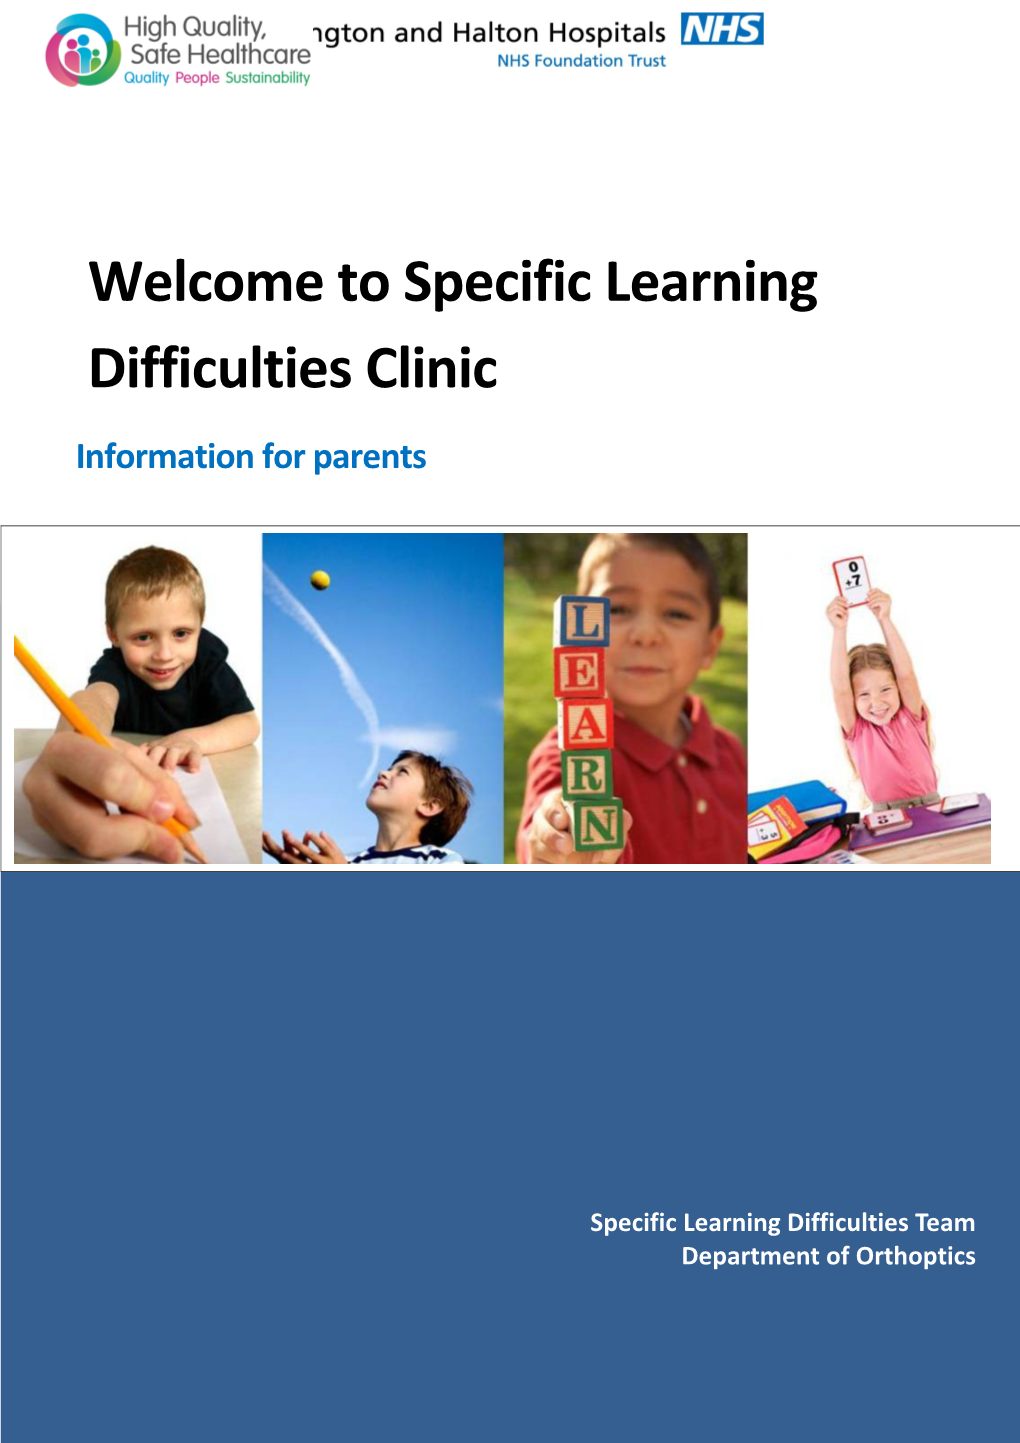 Welcome to Specific Learning Difficulties Clinic